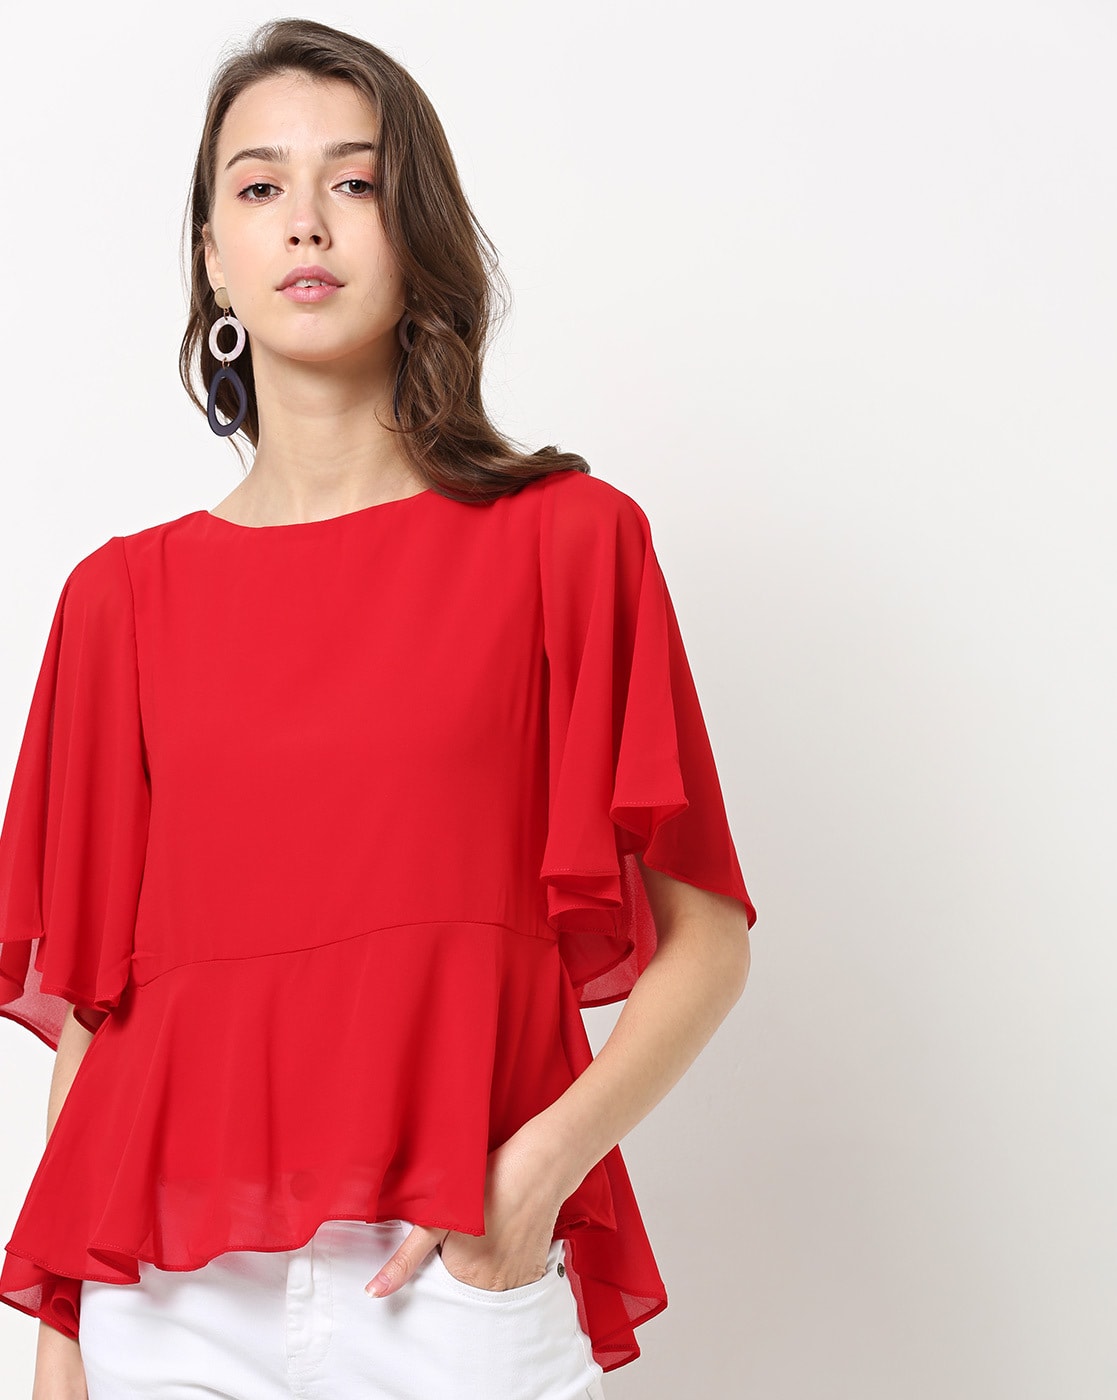 red tops for women